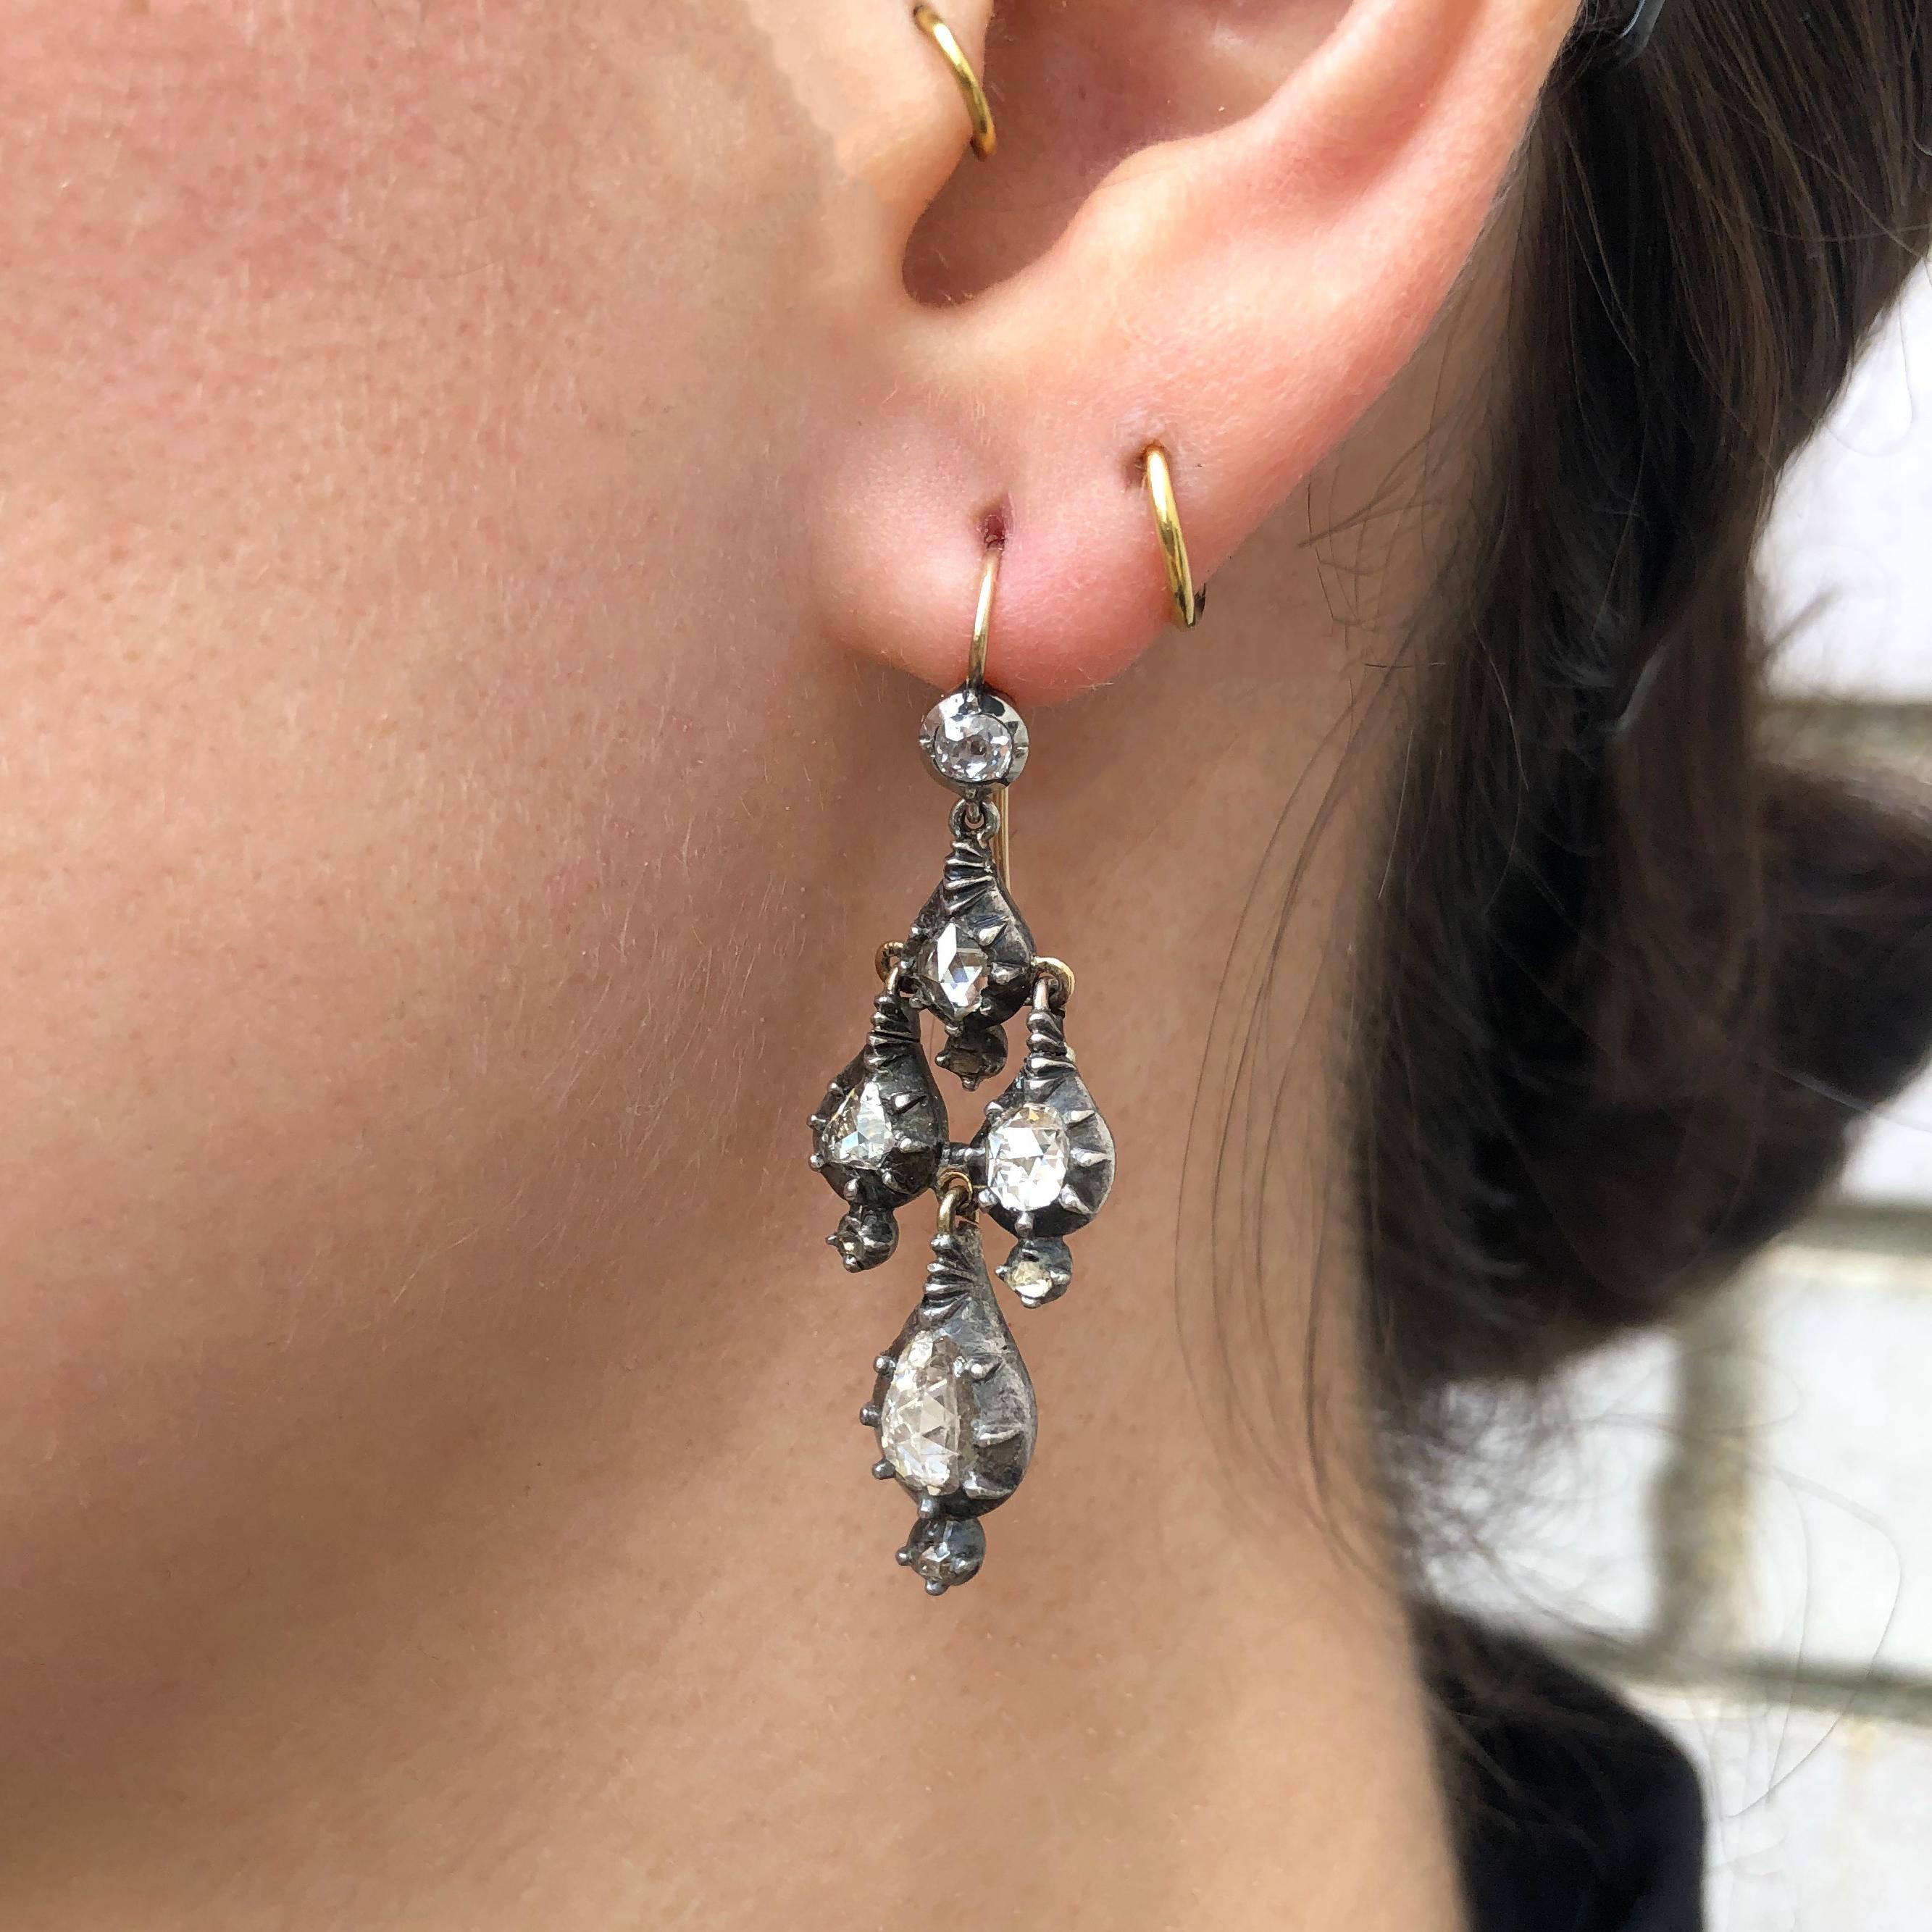 A pair of foil-back diamond, gold and silver girandole earrings, 1790s.

French ear wire likely added at later date. Earrings measure 1.75